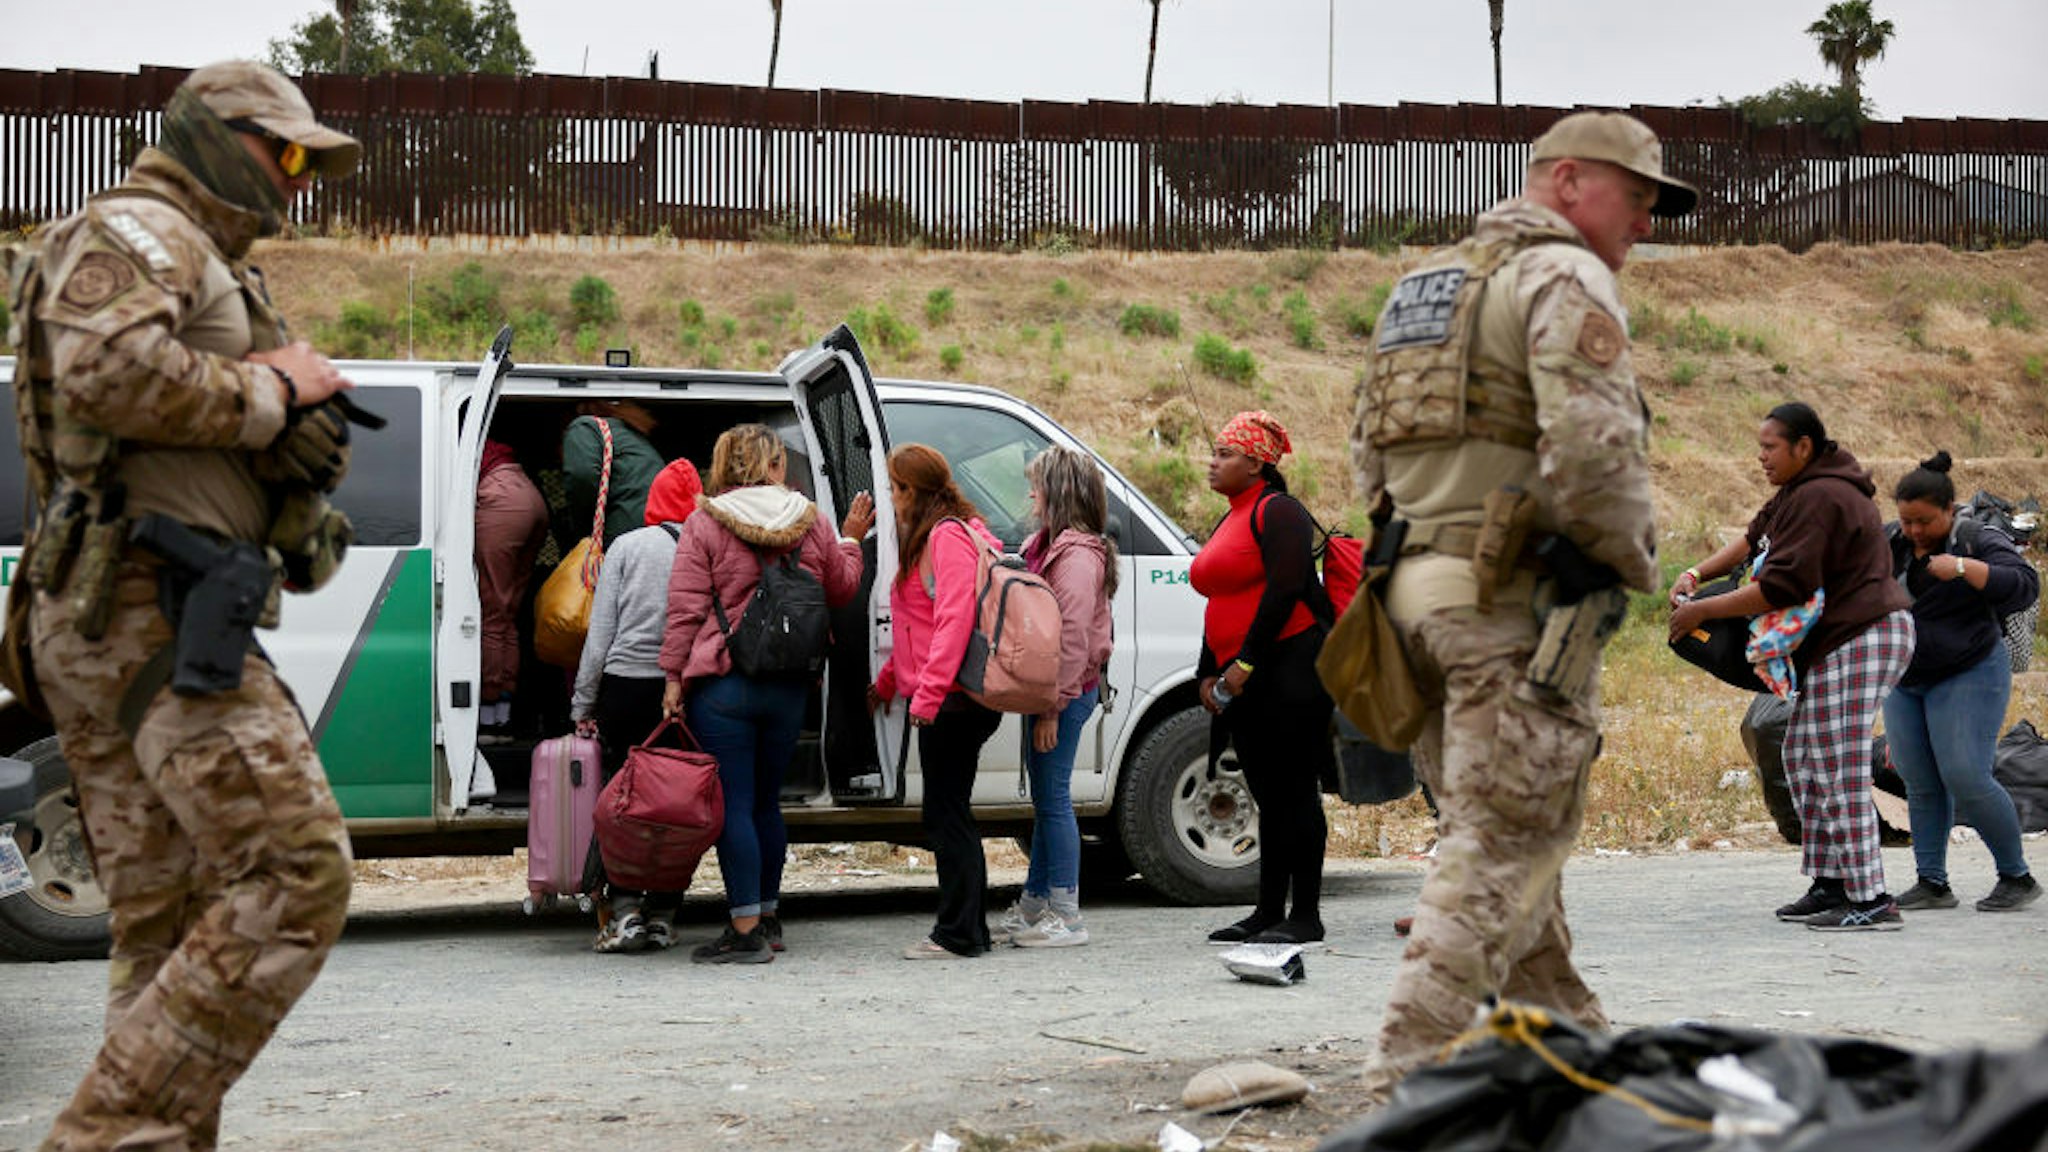 SAN DIEGO, CALIFORNIA - MAY 13: Customs and Border Protection officers walk as immigrants enter a vehicle to be transported from a makeshift camp between border walls, between the U.S. and Mexico, on May 13, 2023 in San Diego, California. Some of the immigrants at the open air camp have been waiting for days in limbo for a chance to plead for asylum while local volunteer groups are providing food and other necessities. The U.S. government's Covid-era Title 42 policy, which for the past three years had allowed for the quick expulsion of irregular migrants entering the country, expired on the evening of May 11. (Photo by Mario Tama/Getty Images)